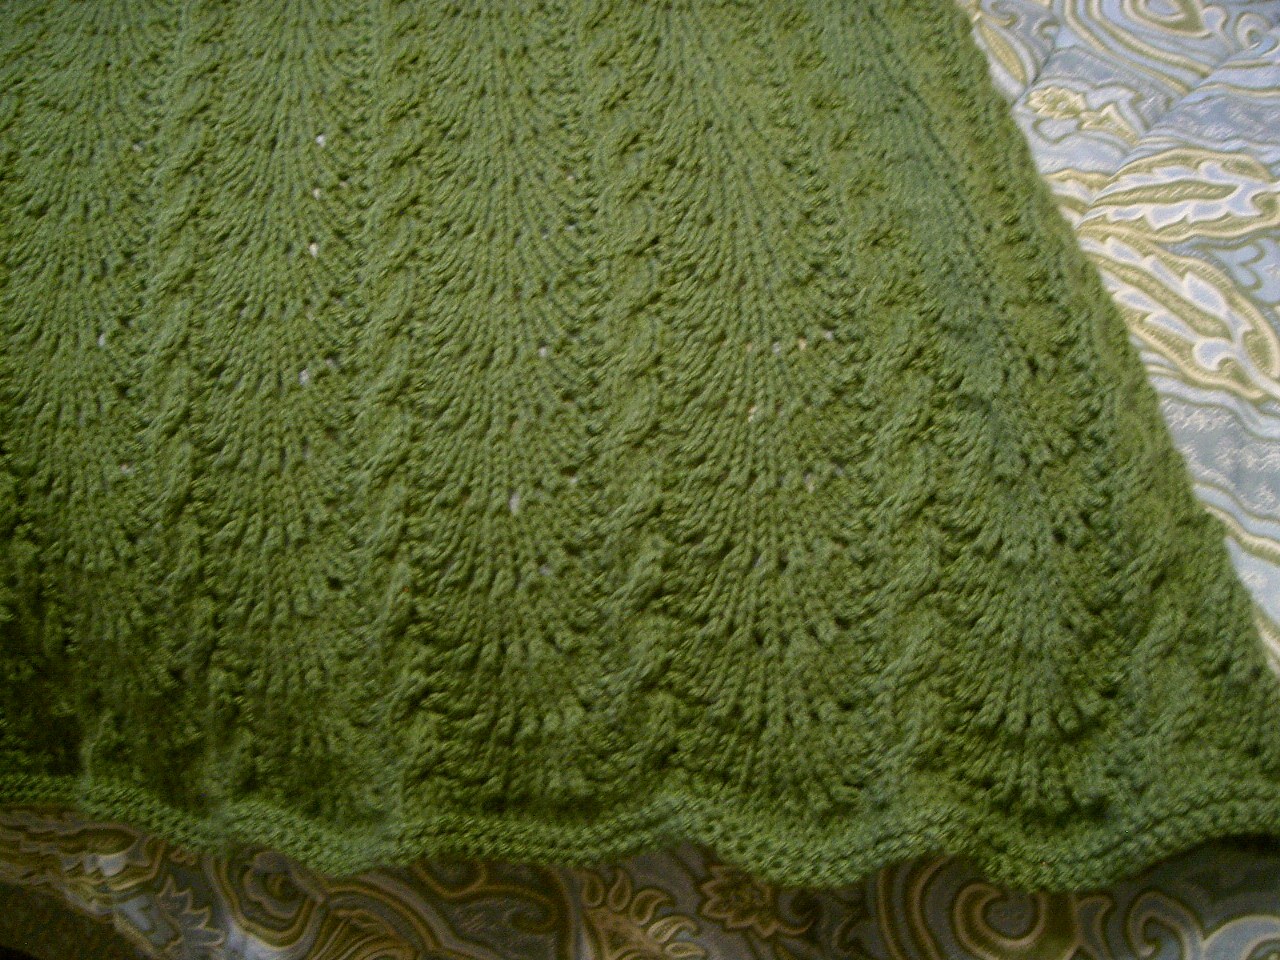 Close-up shot of the completed pattern showing the scallops and cables.